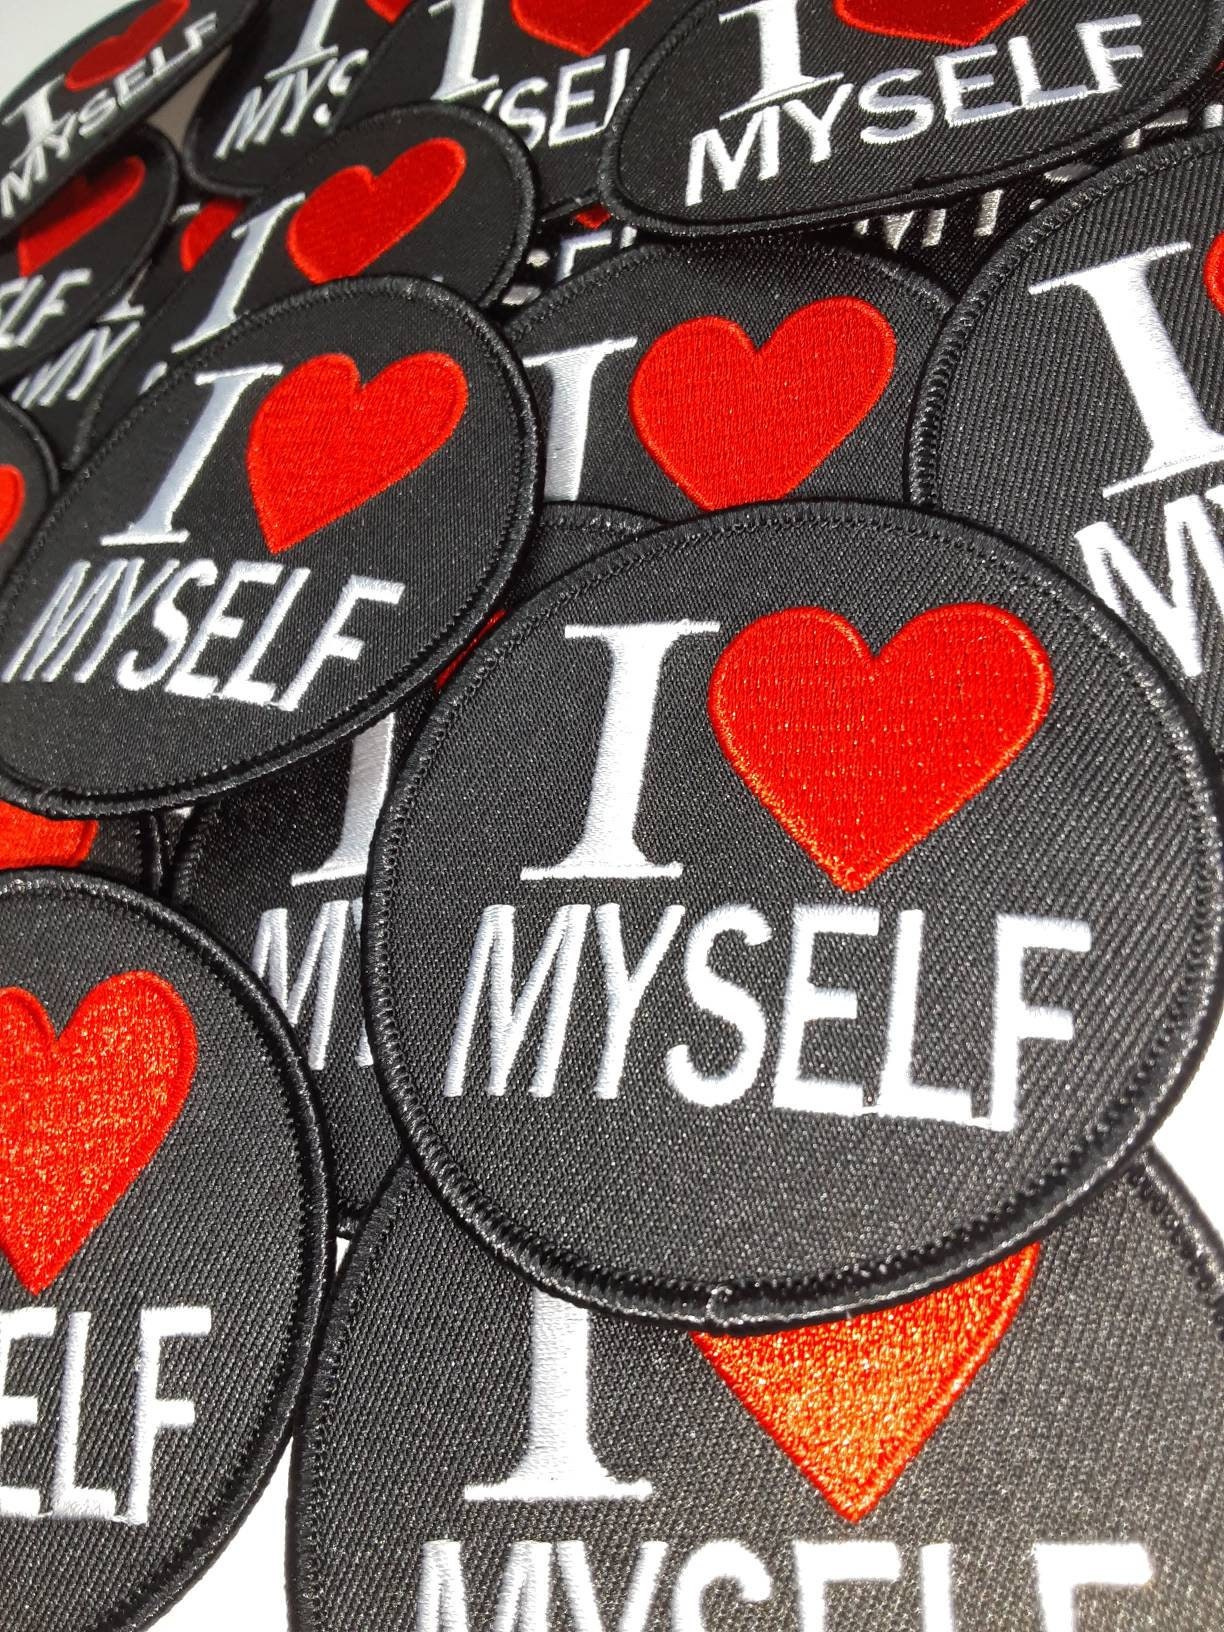 NEW Affirmation Badge,"I Love Myself" Circular Emblem, Iron on Embroidered Patch, Positive Vibes Applique, Cool Patch for Clothing, Size 3"